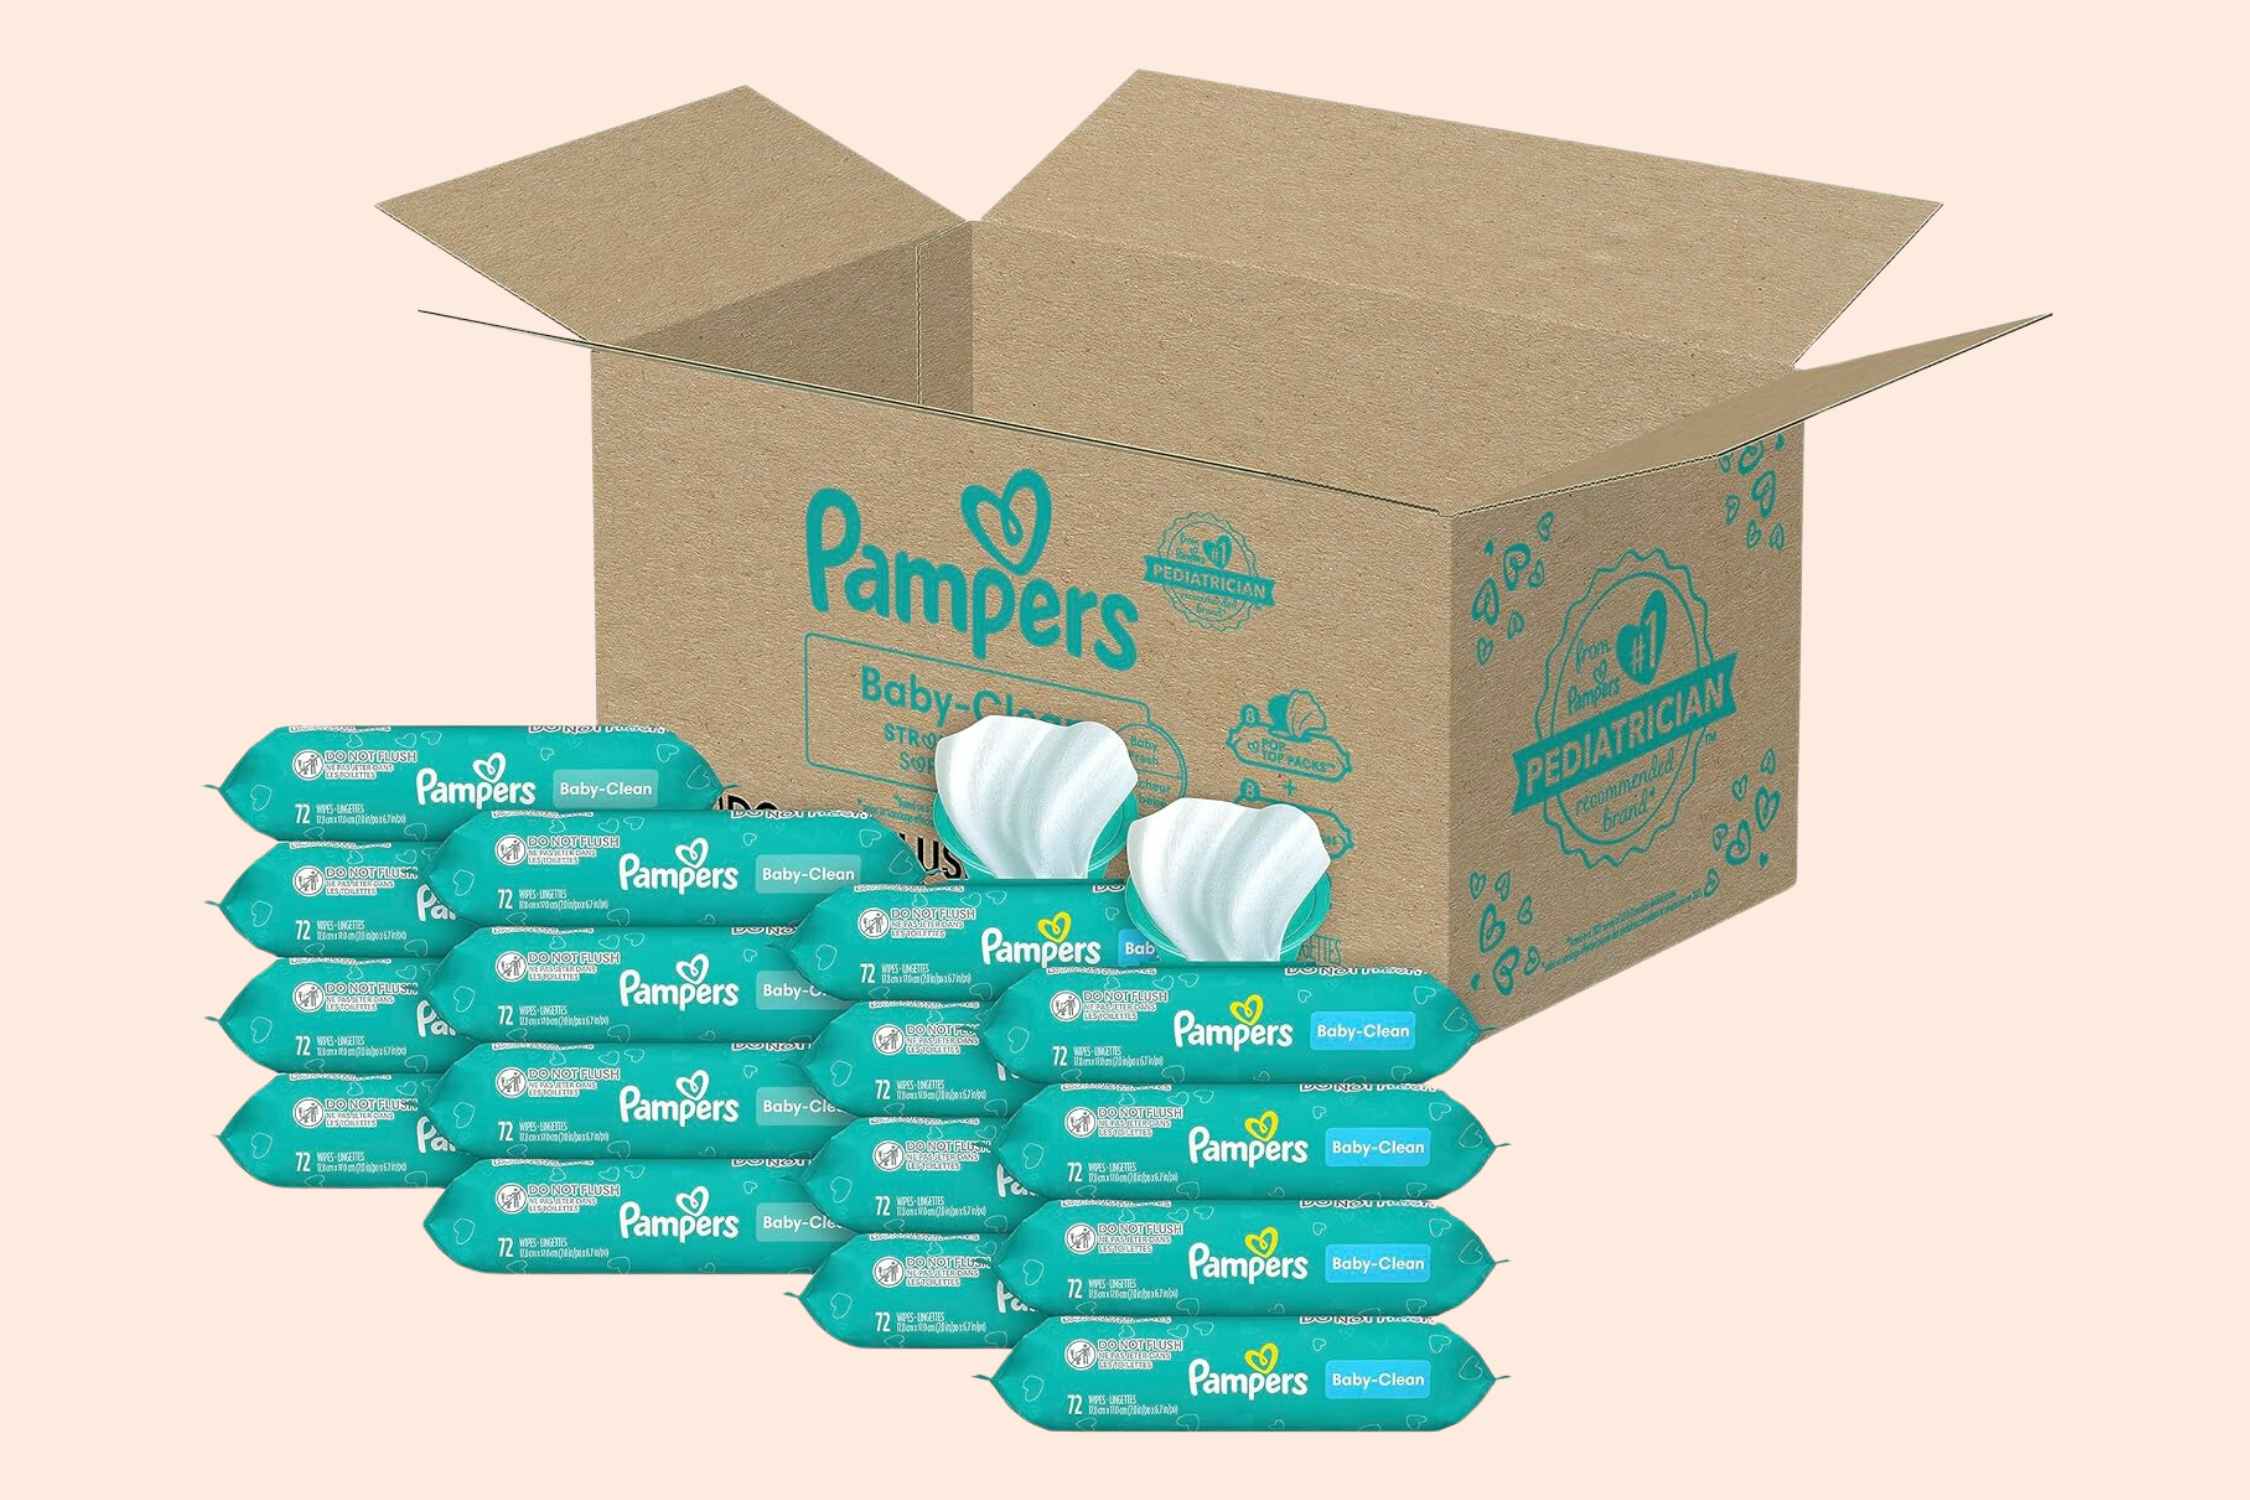 Pampers Baby Wipes, as Low as $1.35 per Pack on Amazon